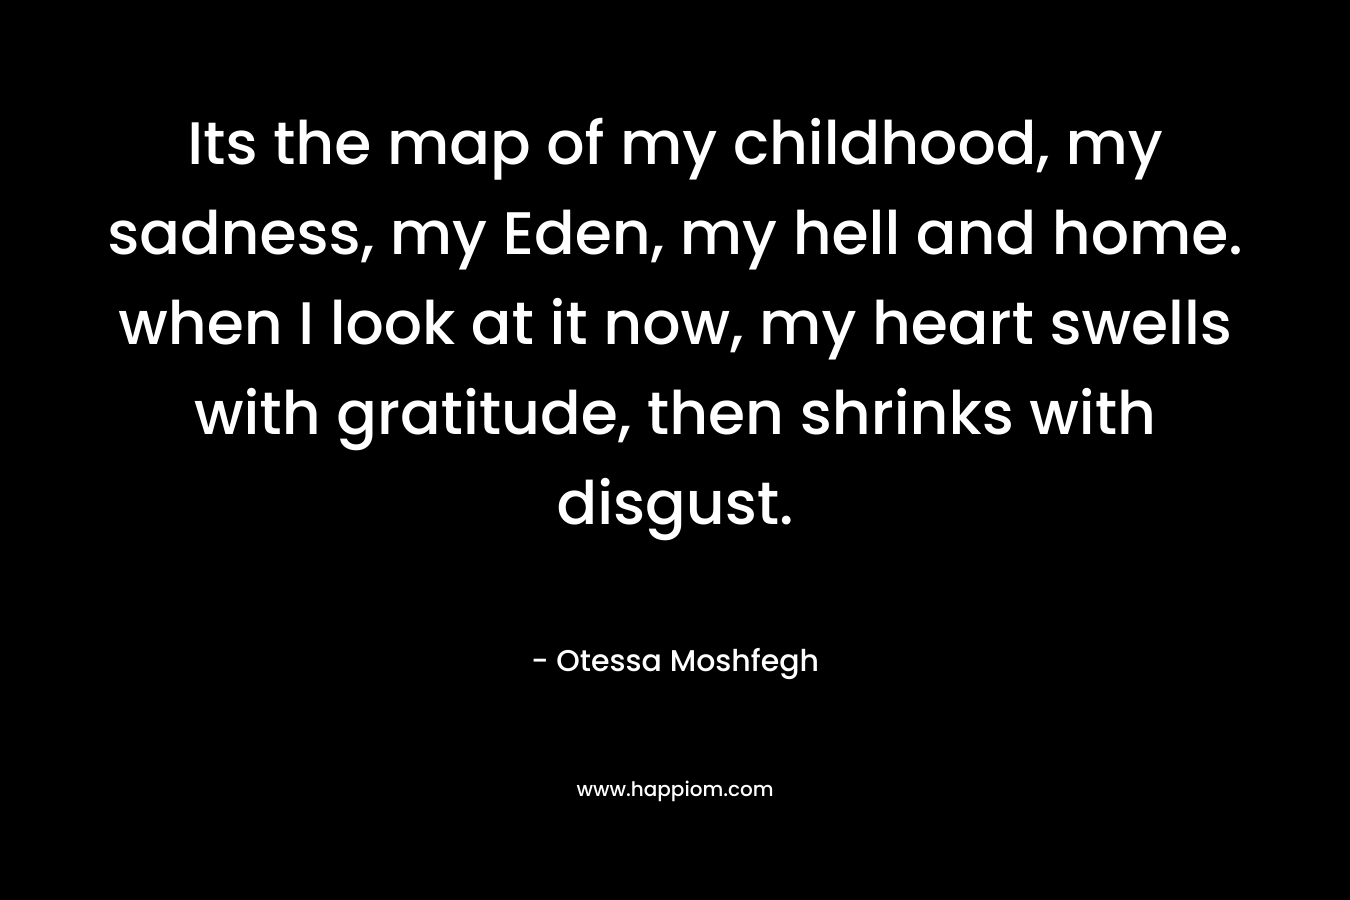 Its the map of my childhood, my sadness, my Eden, my hell and home. when I look at it now, my heart swells with gratitude, then shrinks with disgust. – Otessa Moshfegh